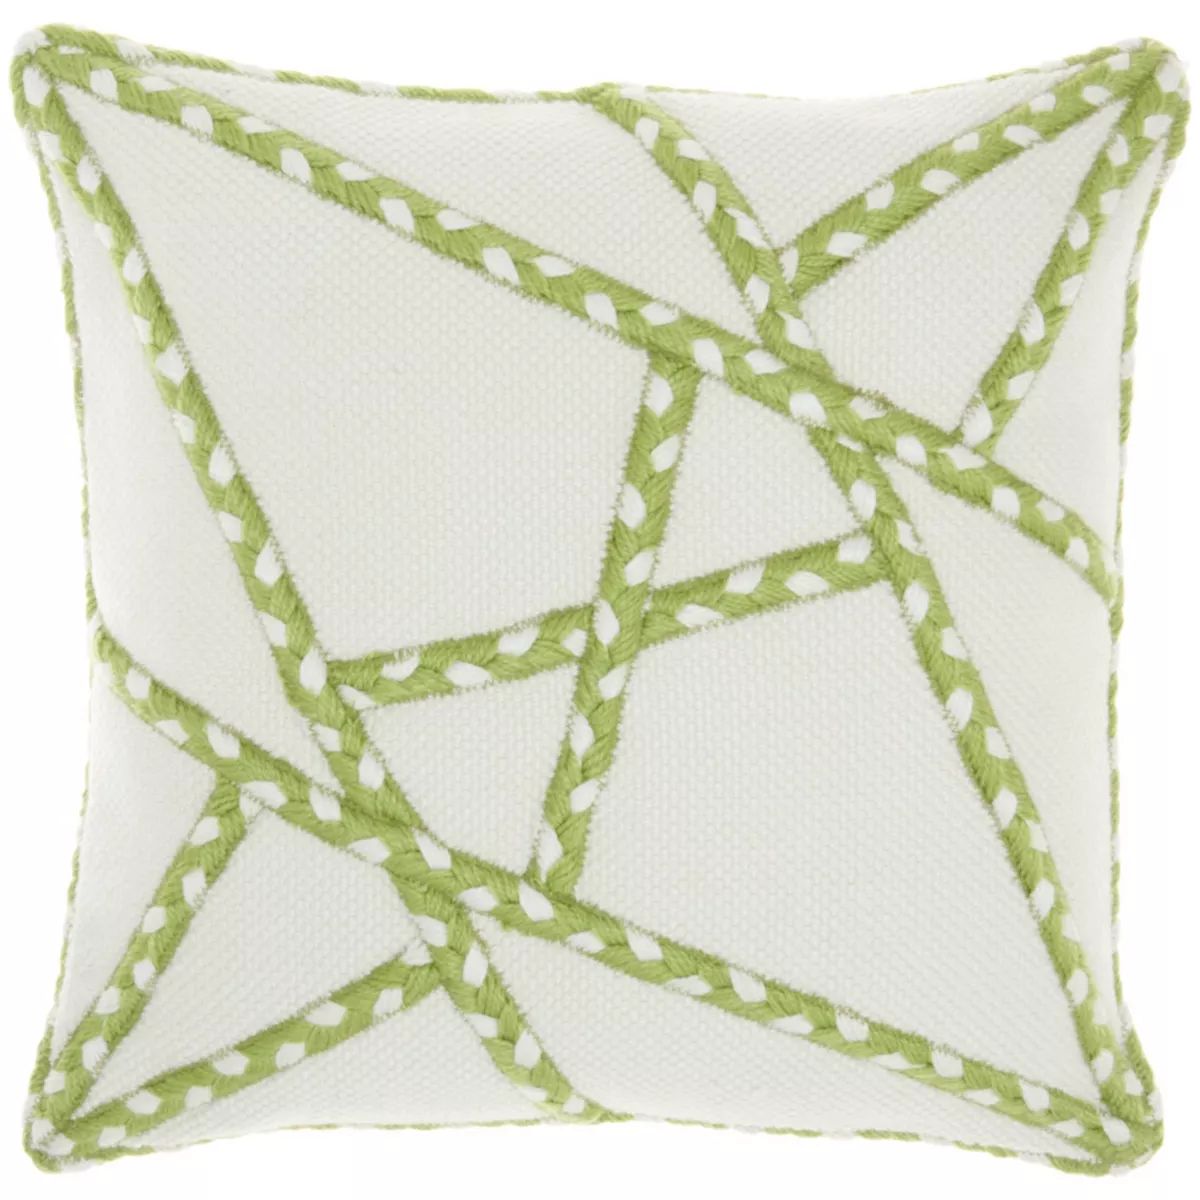 18"x18" Woven Braided Geometric Outdoors Square Throw Pillow - Mina Victory | Target